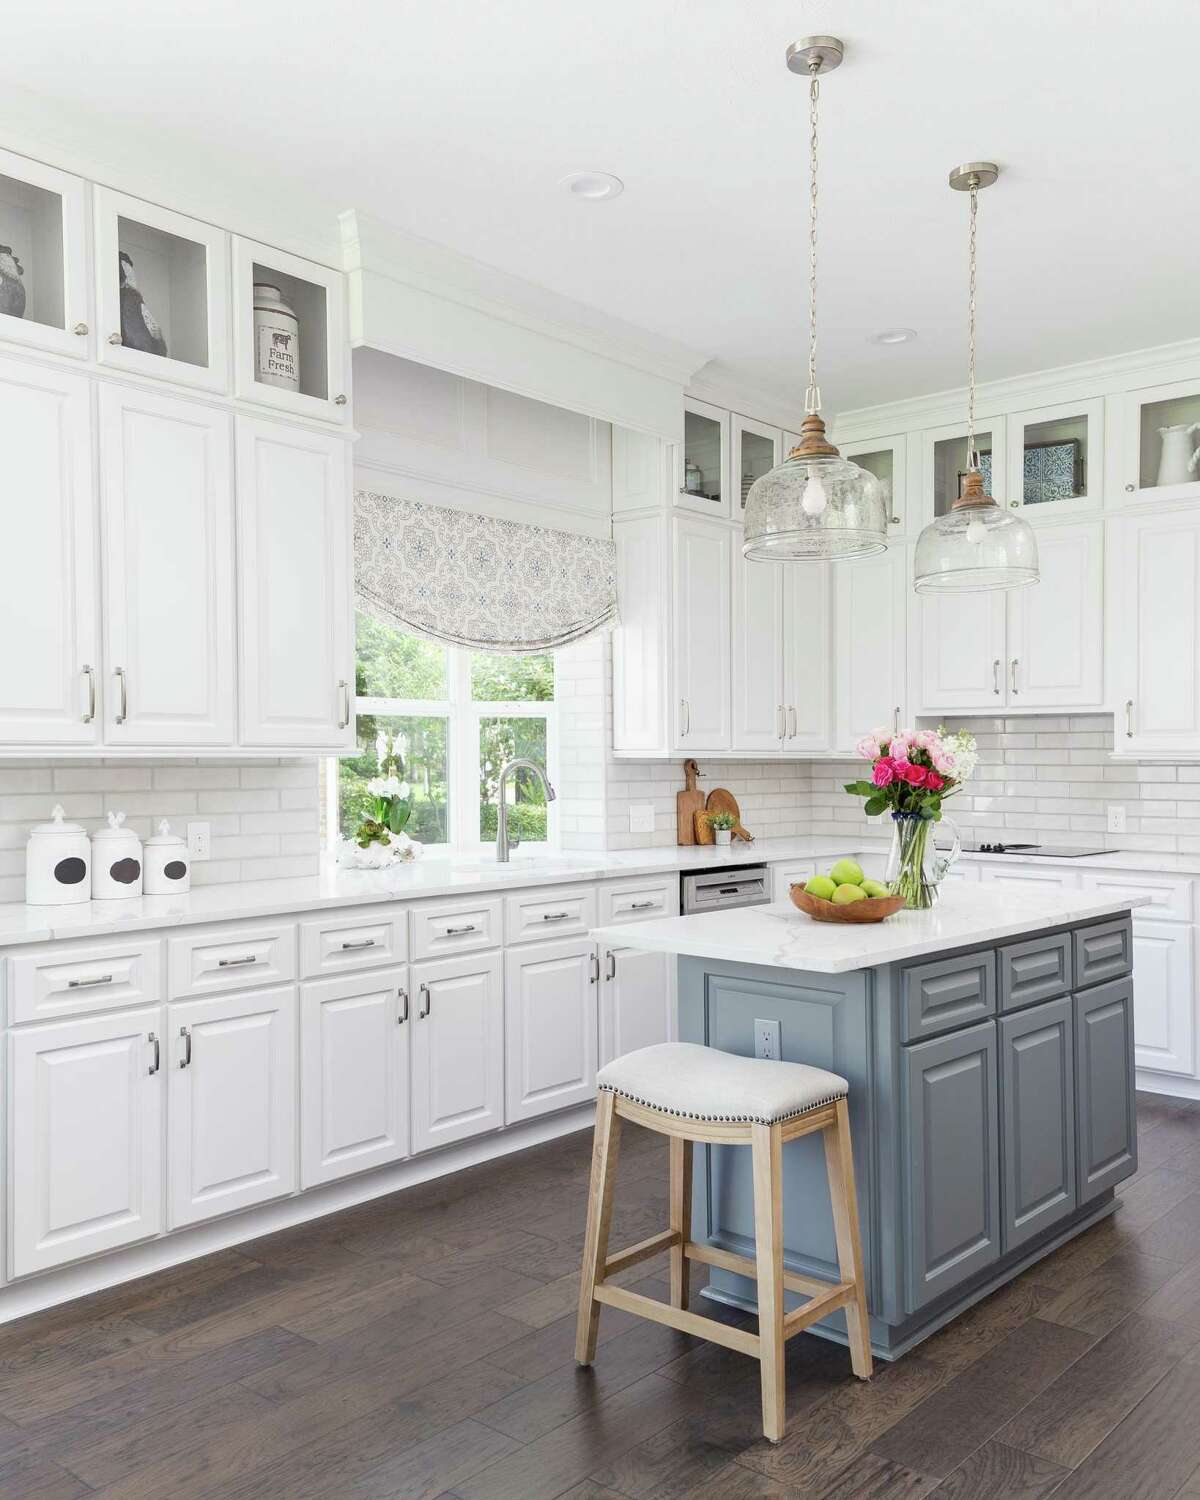 Beth Clark’s kitchen used to be full of beige. A renovation made it lighter and brighter in transitional style.